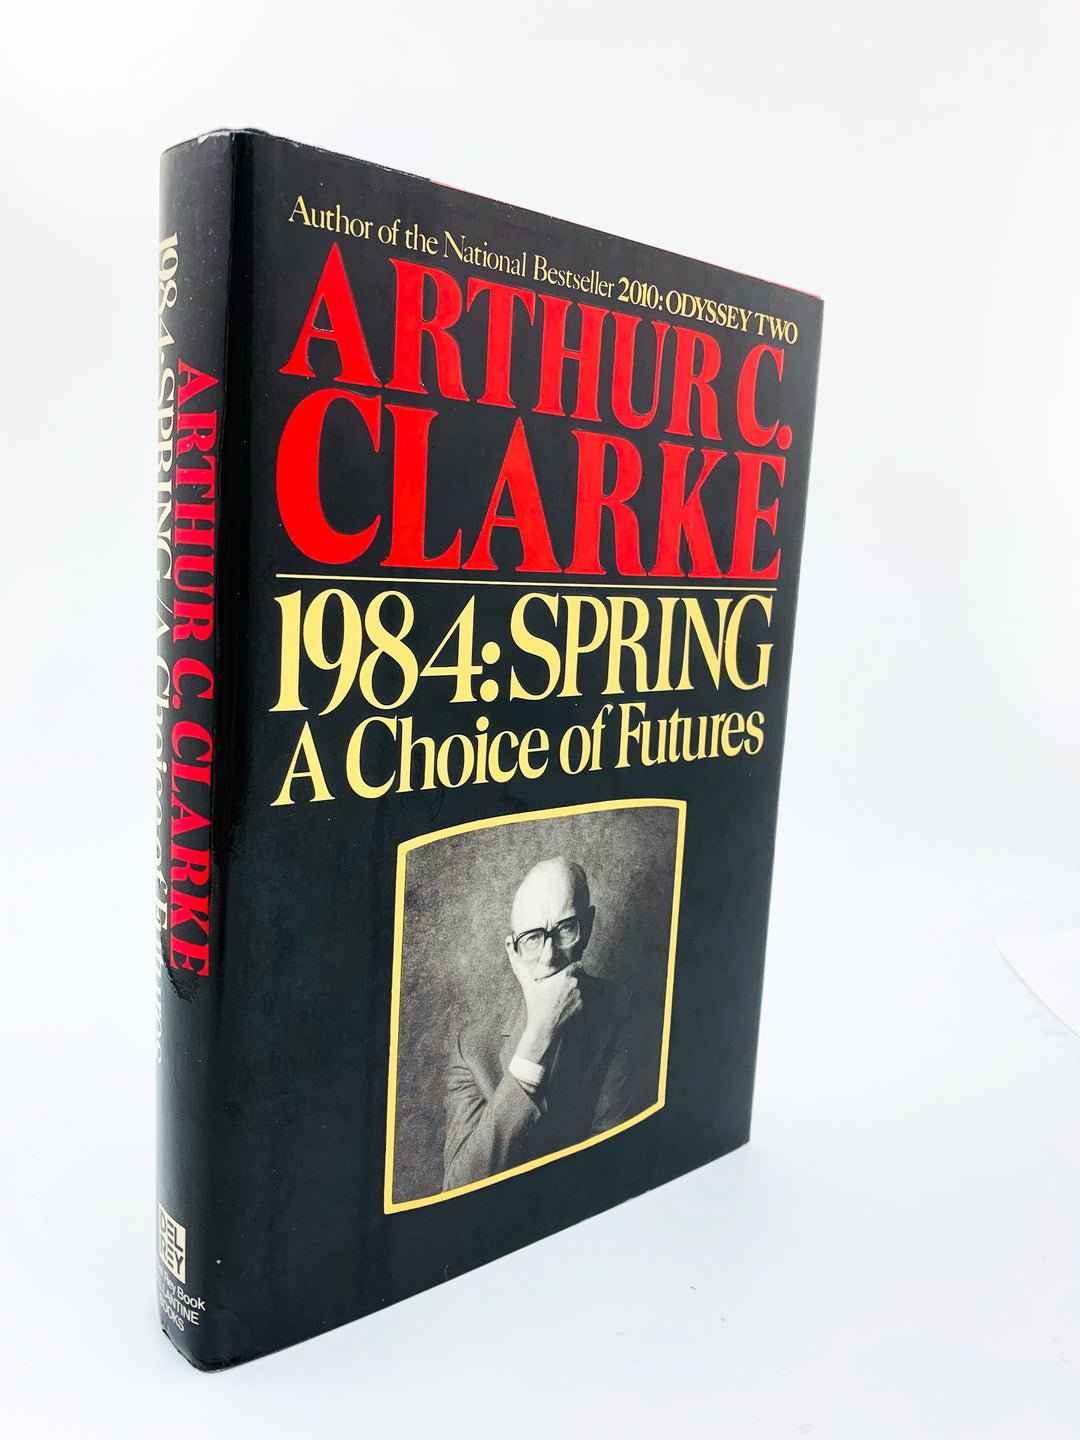 Clarke, Arthur C - 1984 : Spring A Choice of Futures - SIGNED | front cover